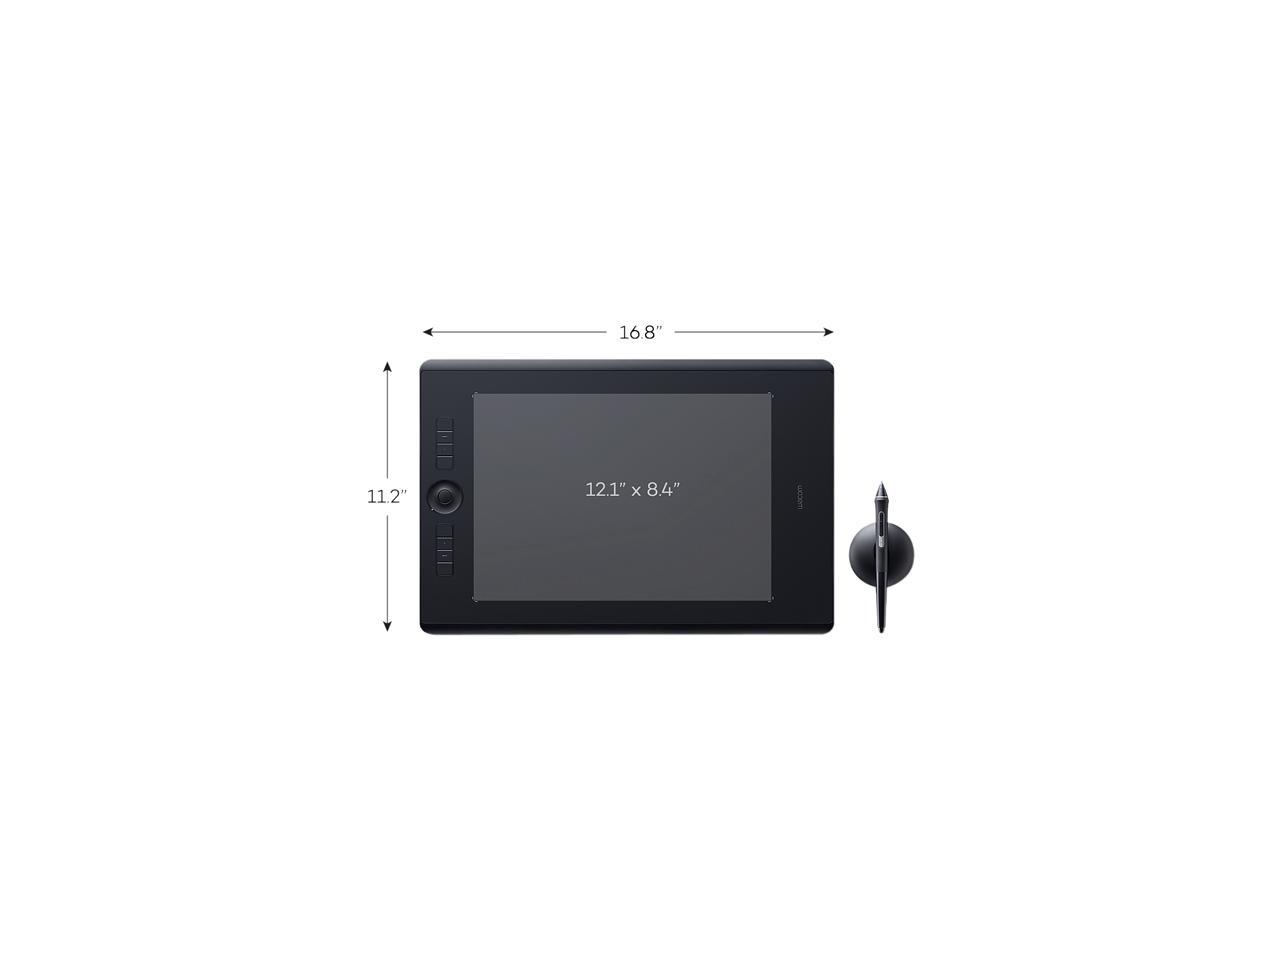 Wacom Intuos Pro Digital Graphic Drawing Tablet for Mac or PC, Large, (PTH860) - image 5 of 8